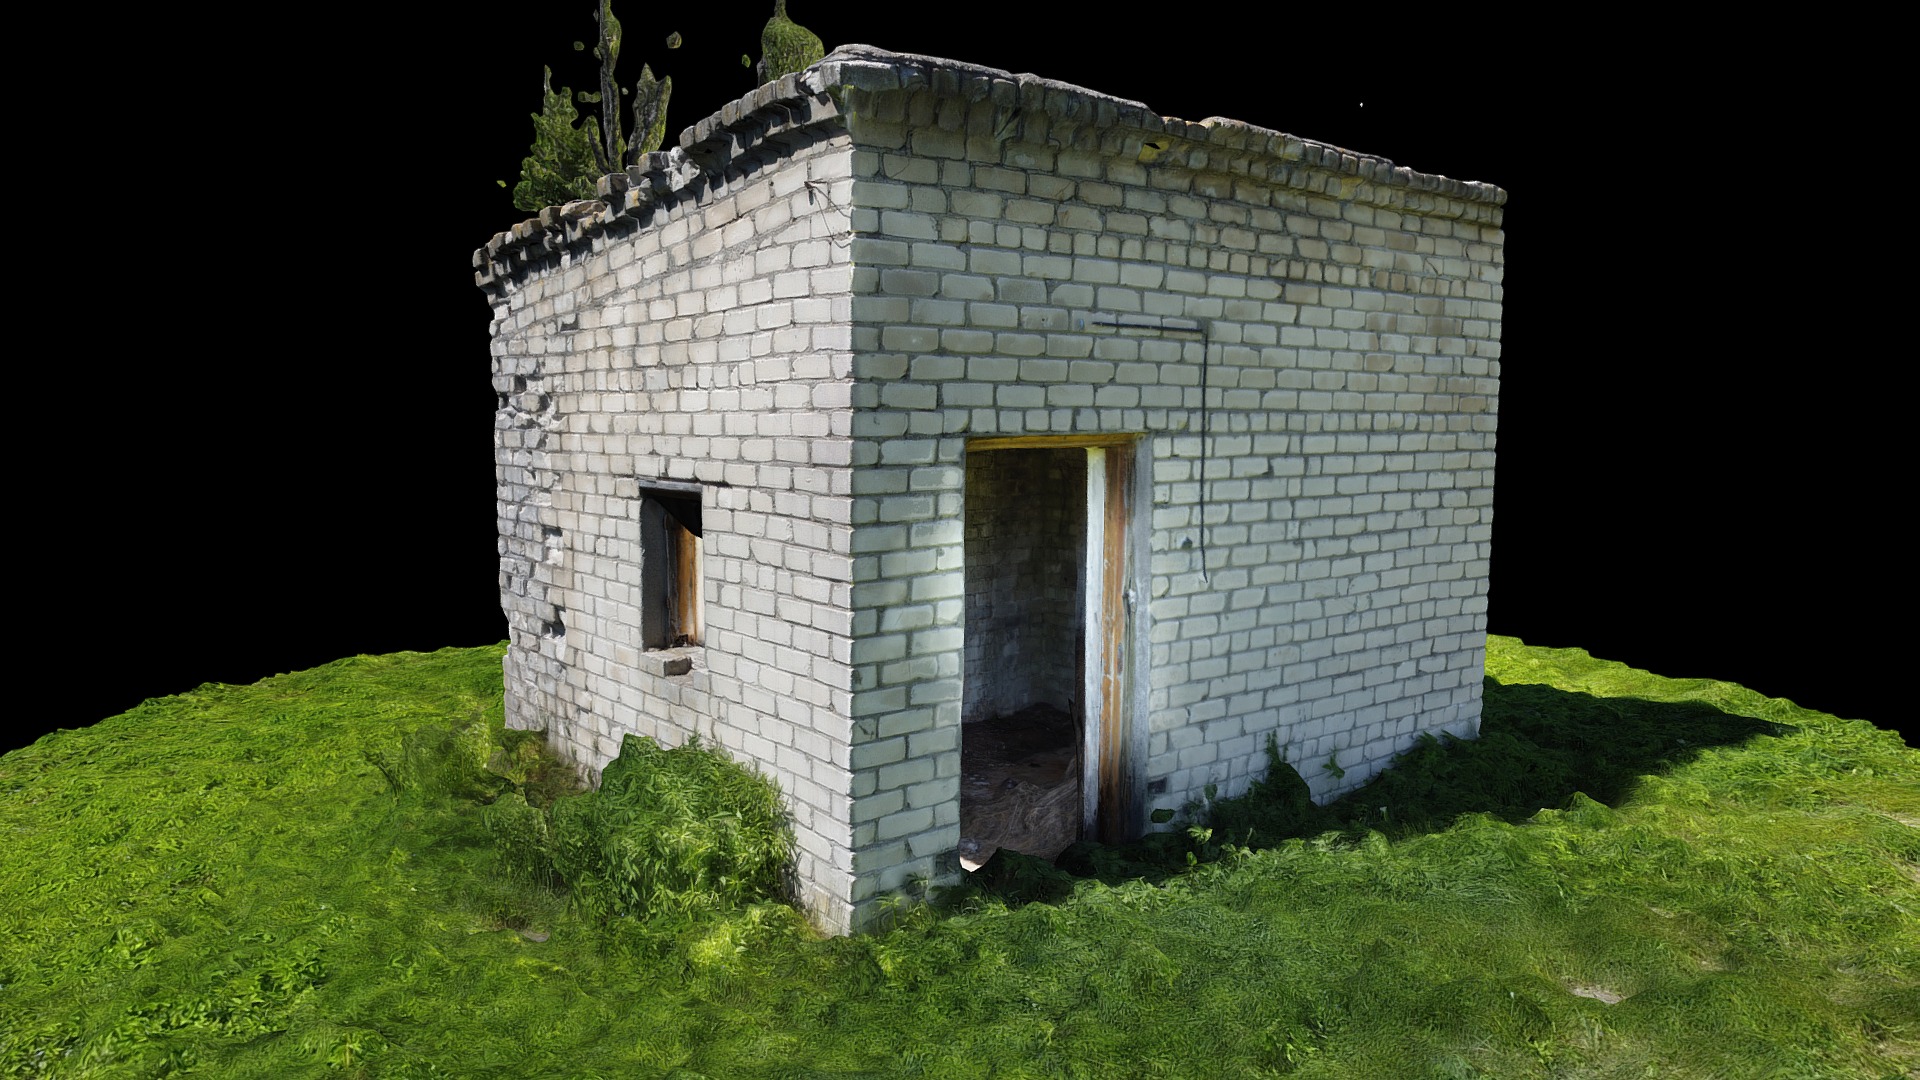 3D model Beautiful Small Brick House - This is a 3D model of the Beautiful Small Brick House. The 3D model is about a stone building on a grassy hill.